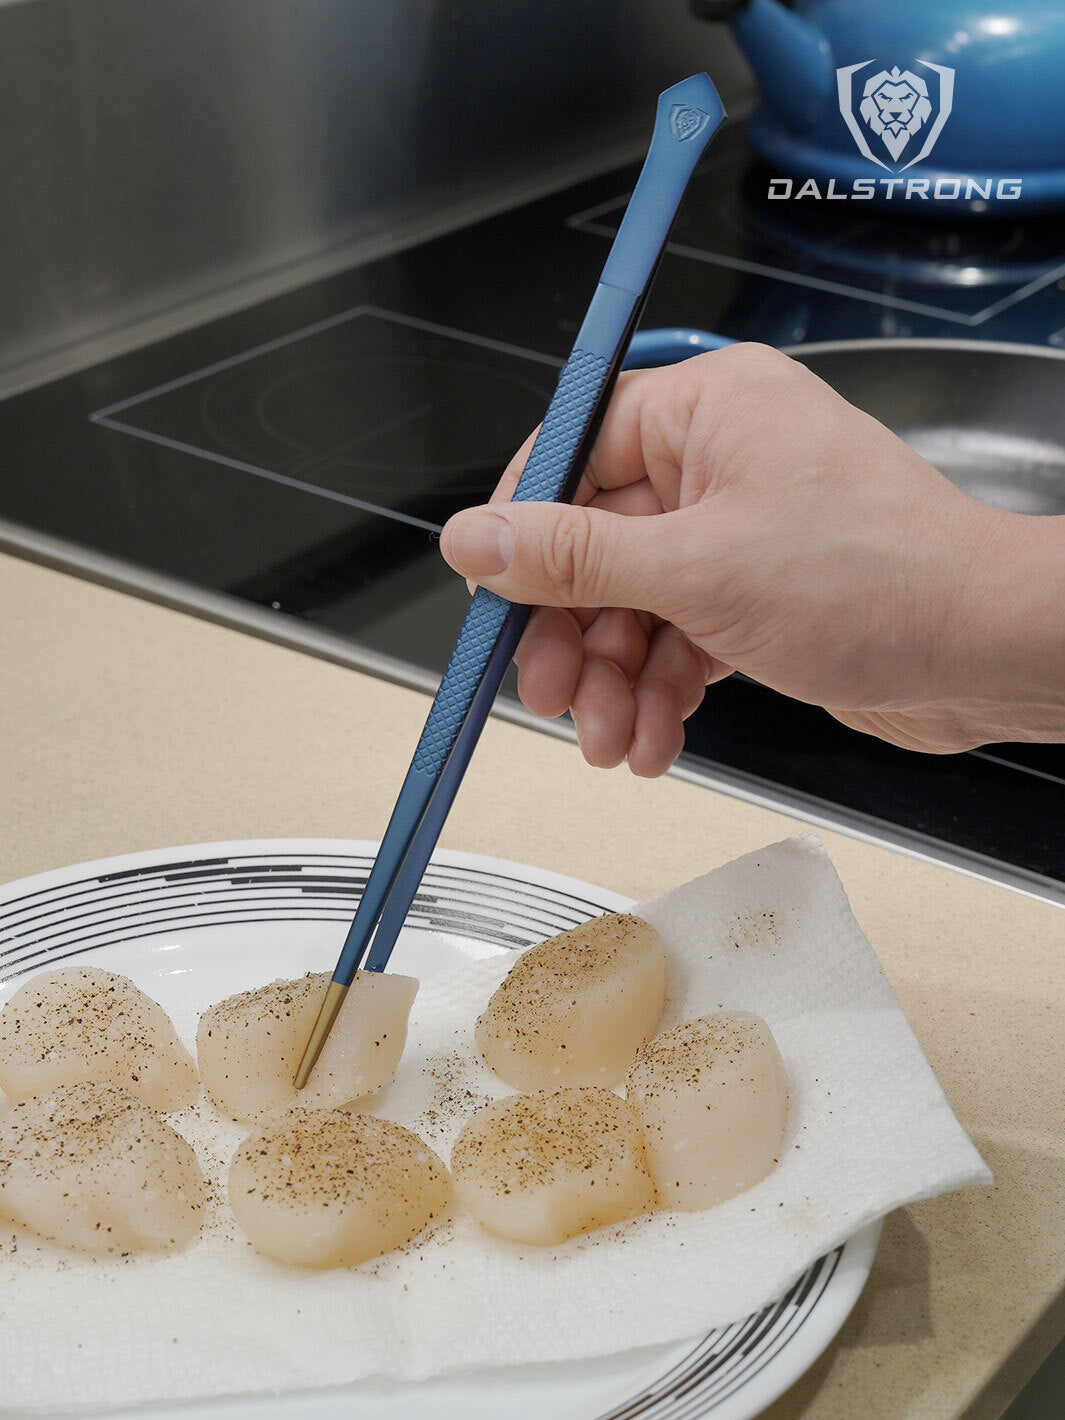 Dalstrong professional 10 inch plating tweezers with scallops on a plate.